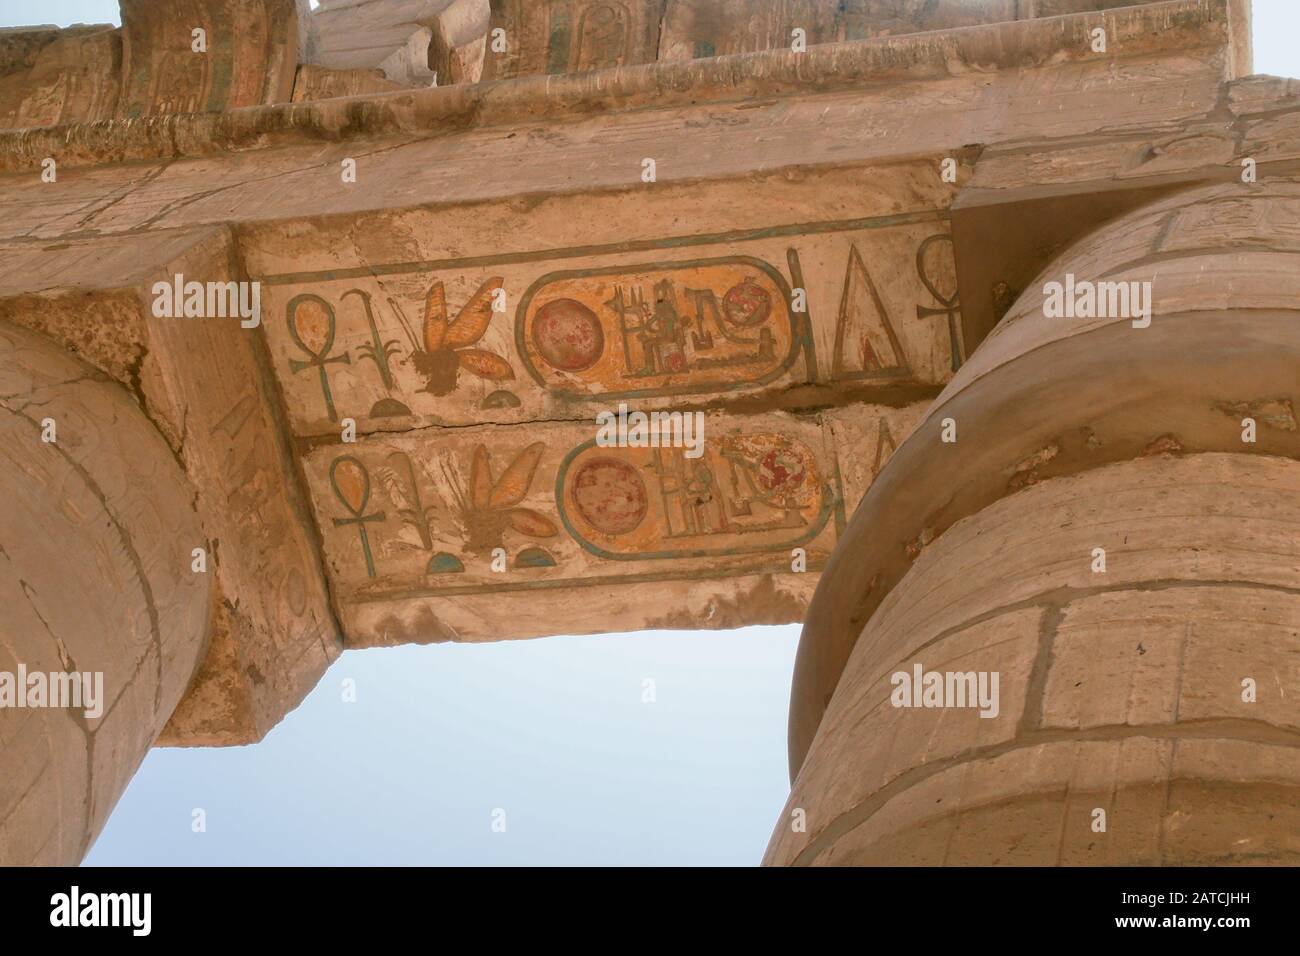 Luxor, Karnak, Egypt, Africa. Temple of Karnak. Looking up. Painted and carved relief hieroglyphics. Stock Photo